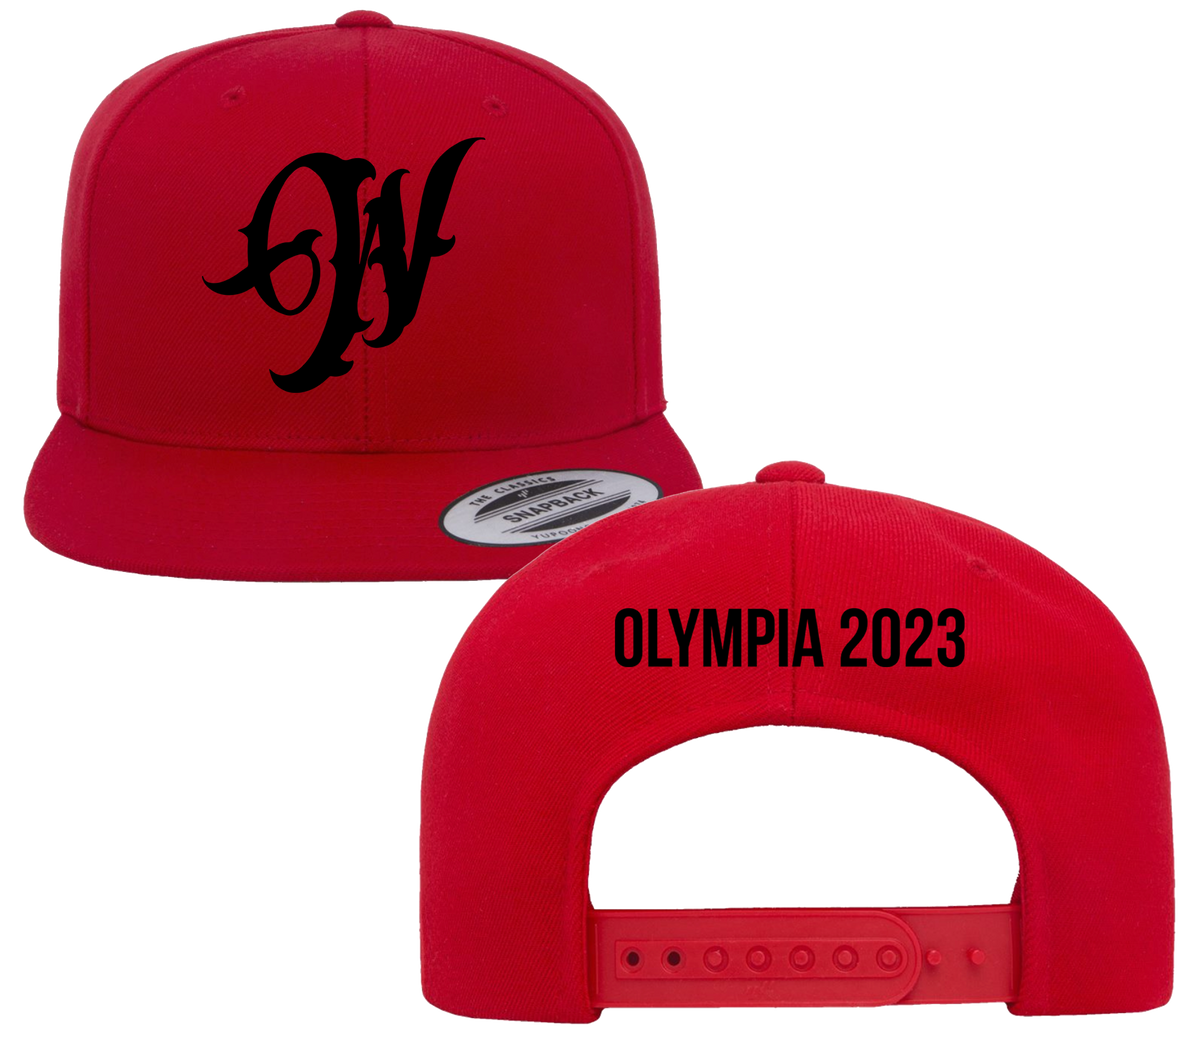 WYCKED APPAREL SNAP BACK HAT - OLYMPIA 2023 - BLACK ON RED